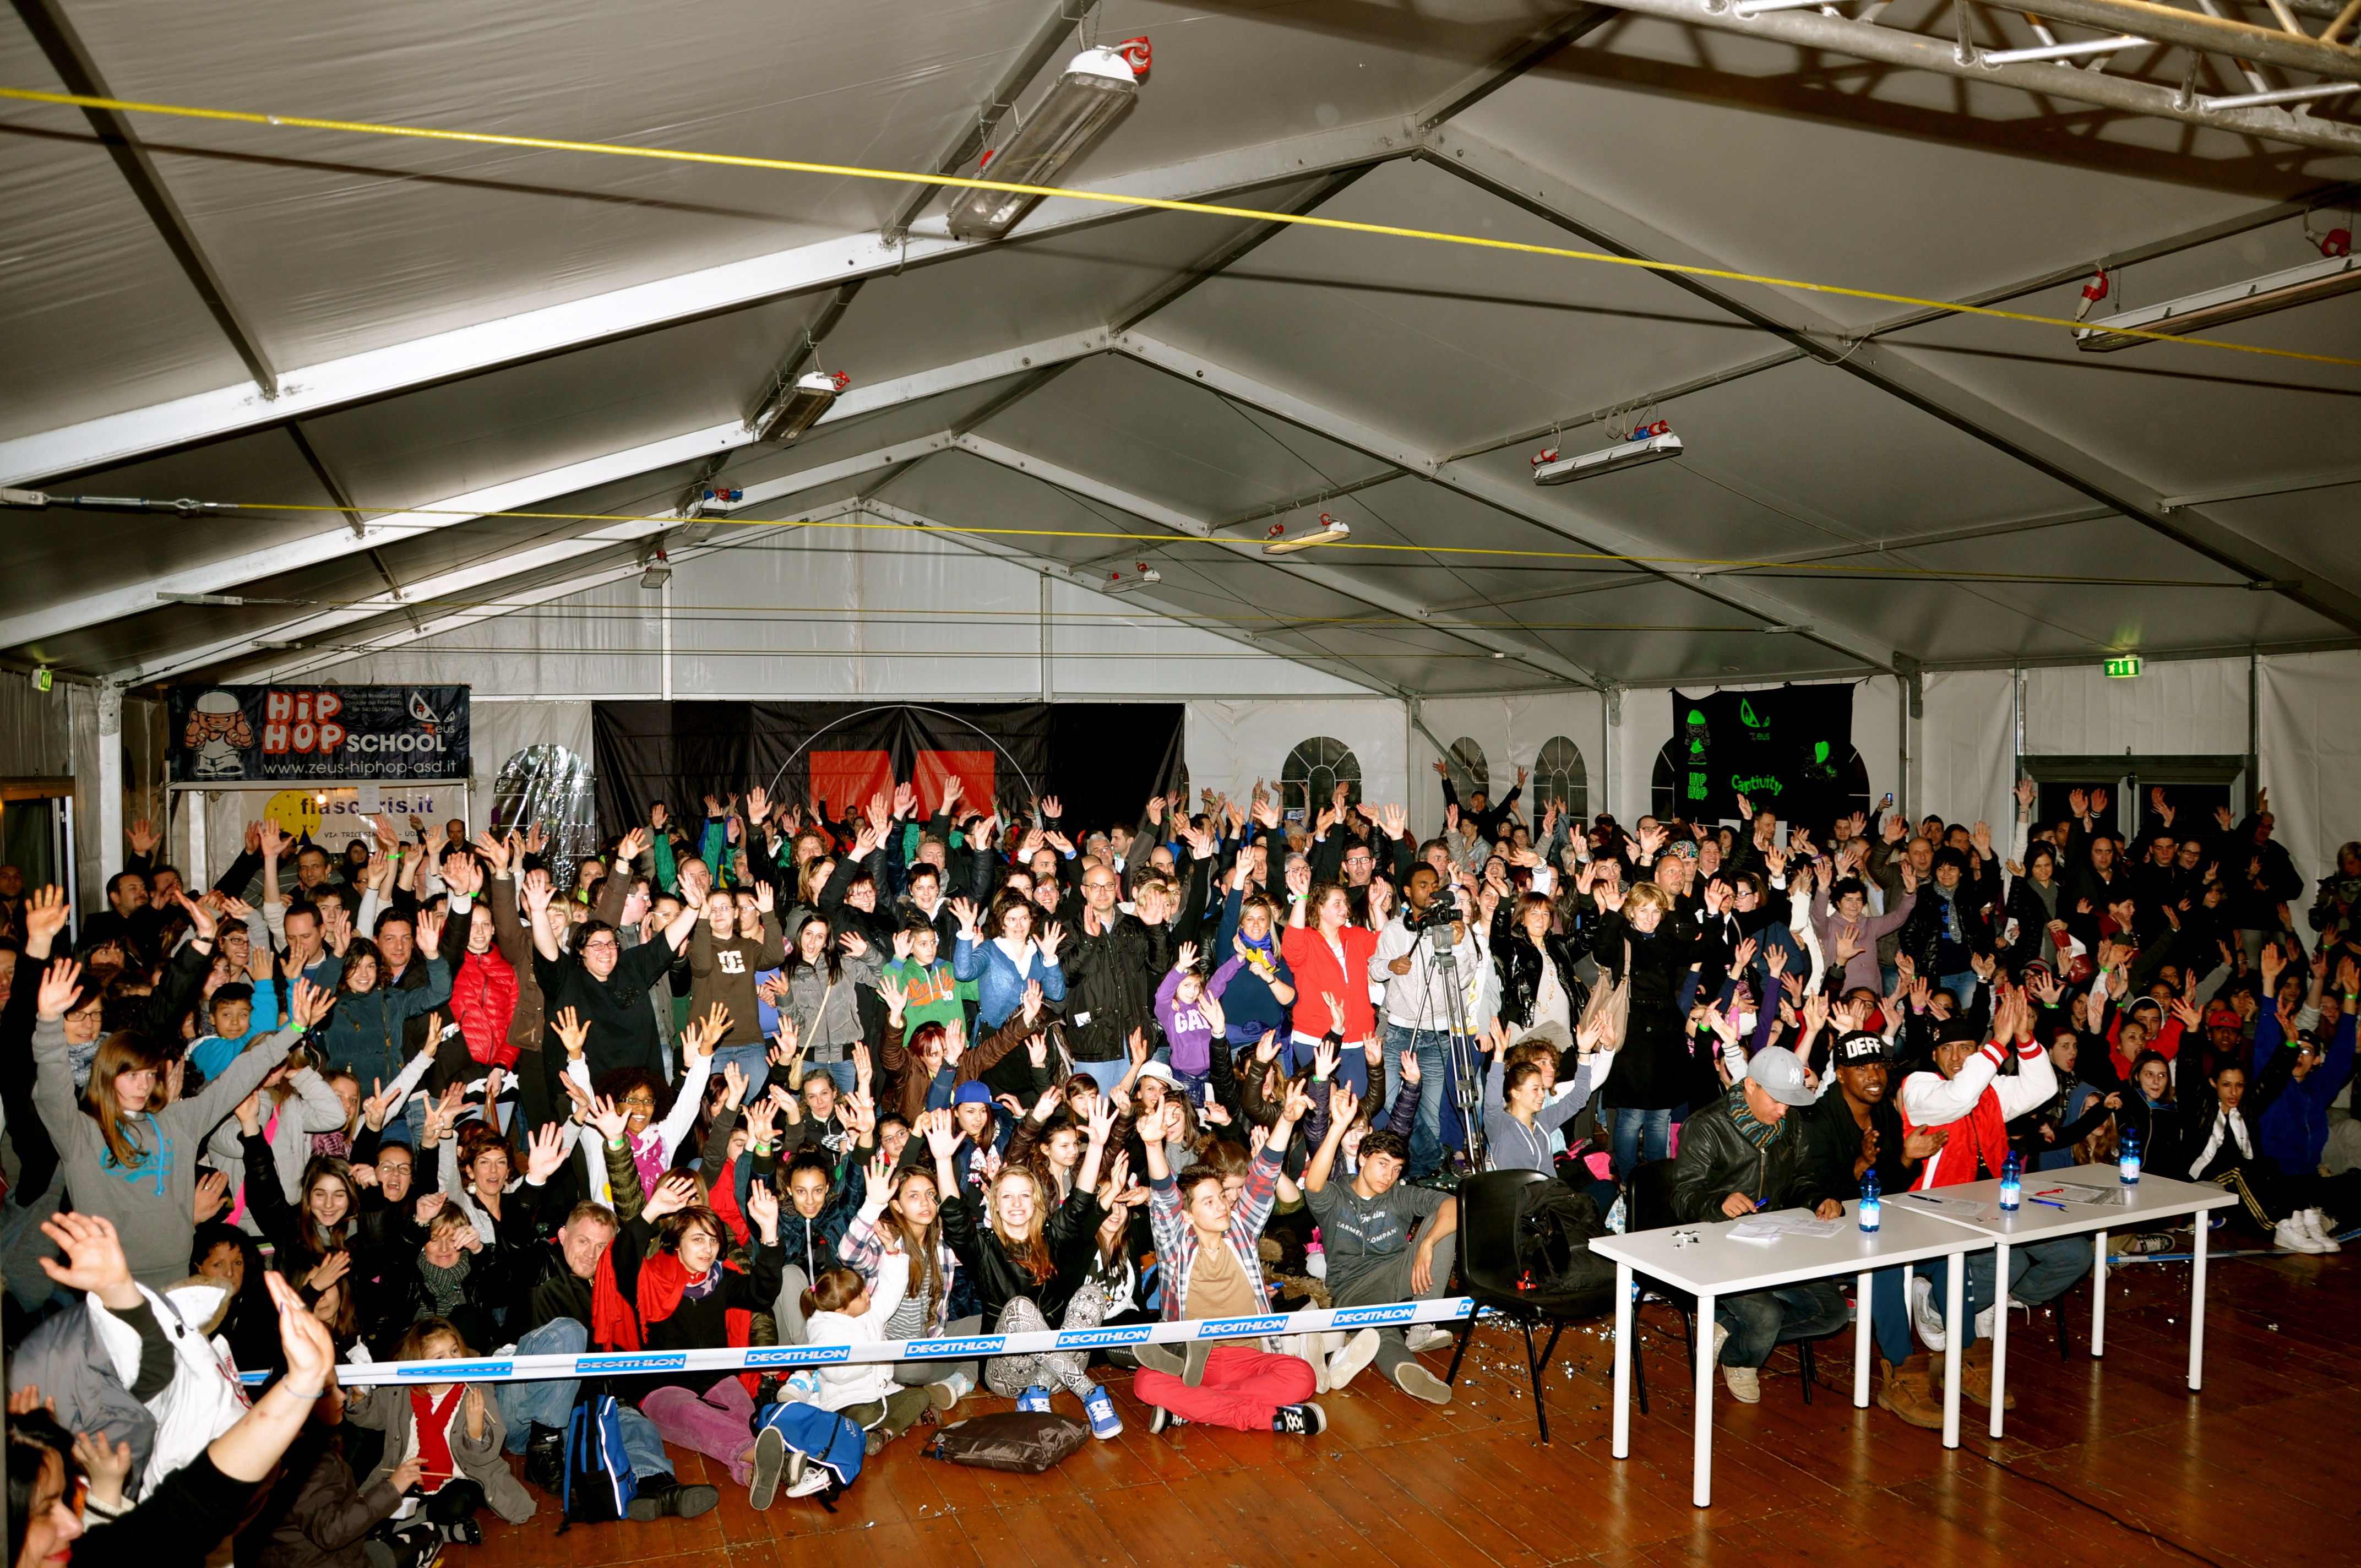 A picture of the crowd during a dance competition in Italy.  I'm sitting at the front, because I was one of the 3 judges brought in for the event!